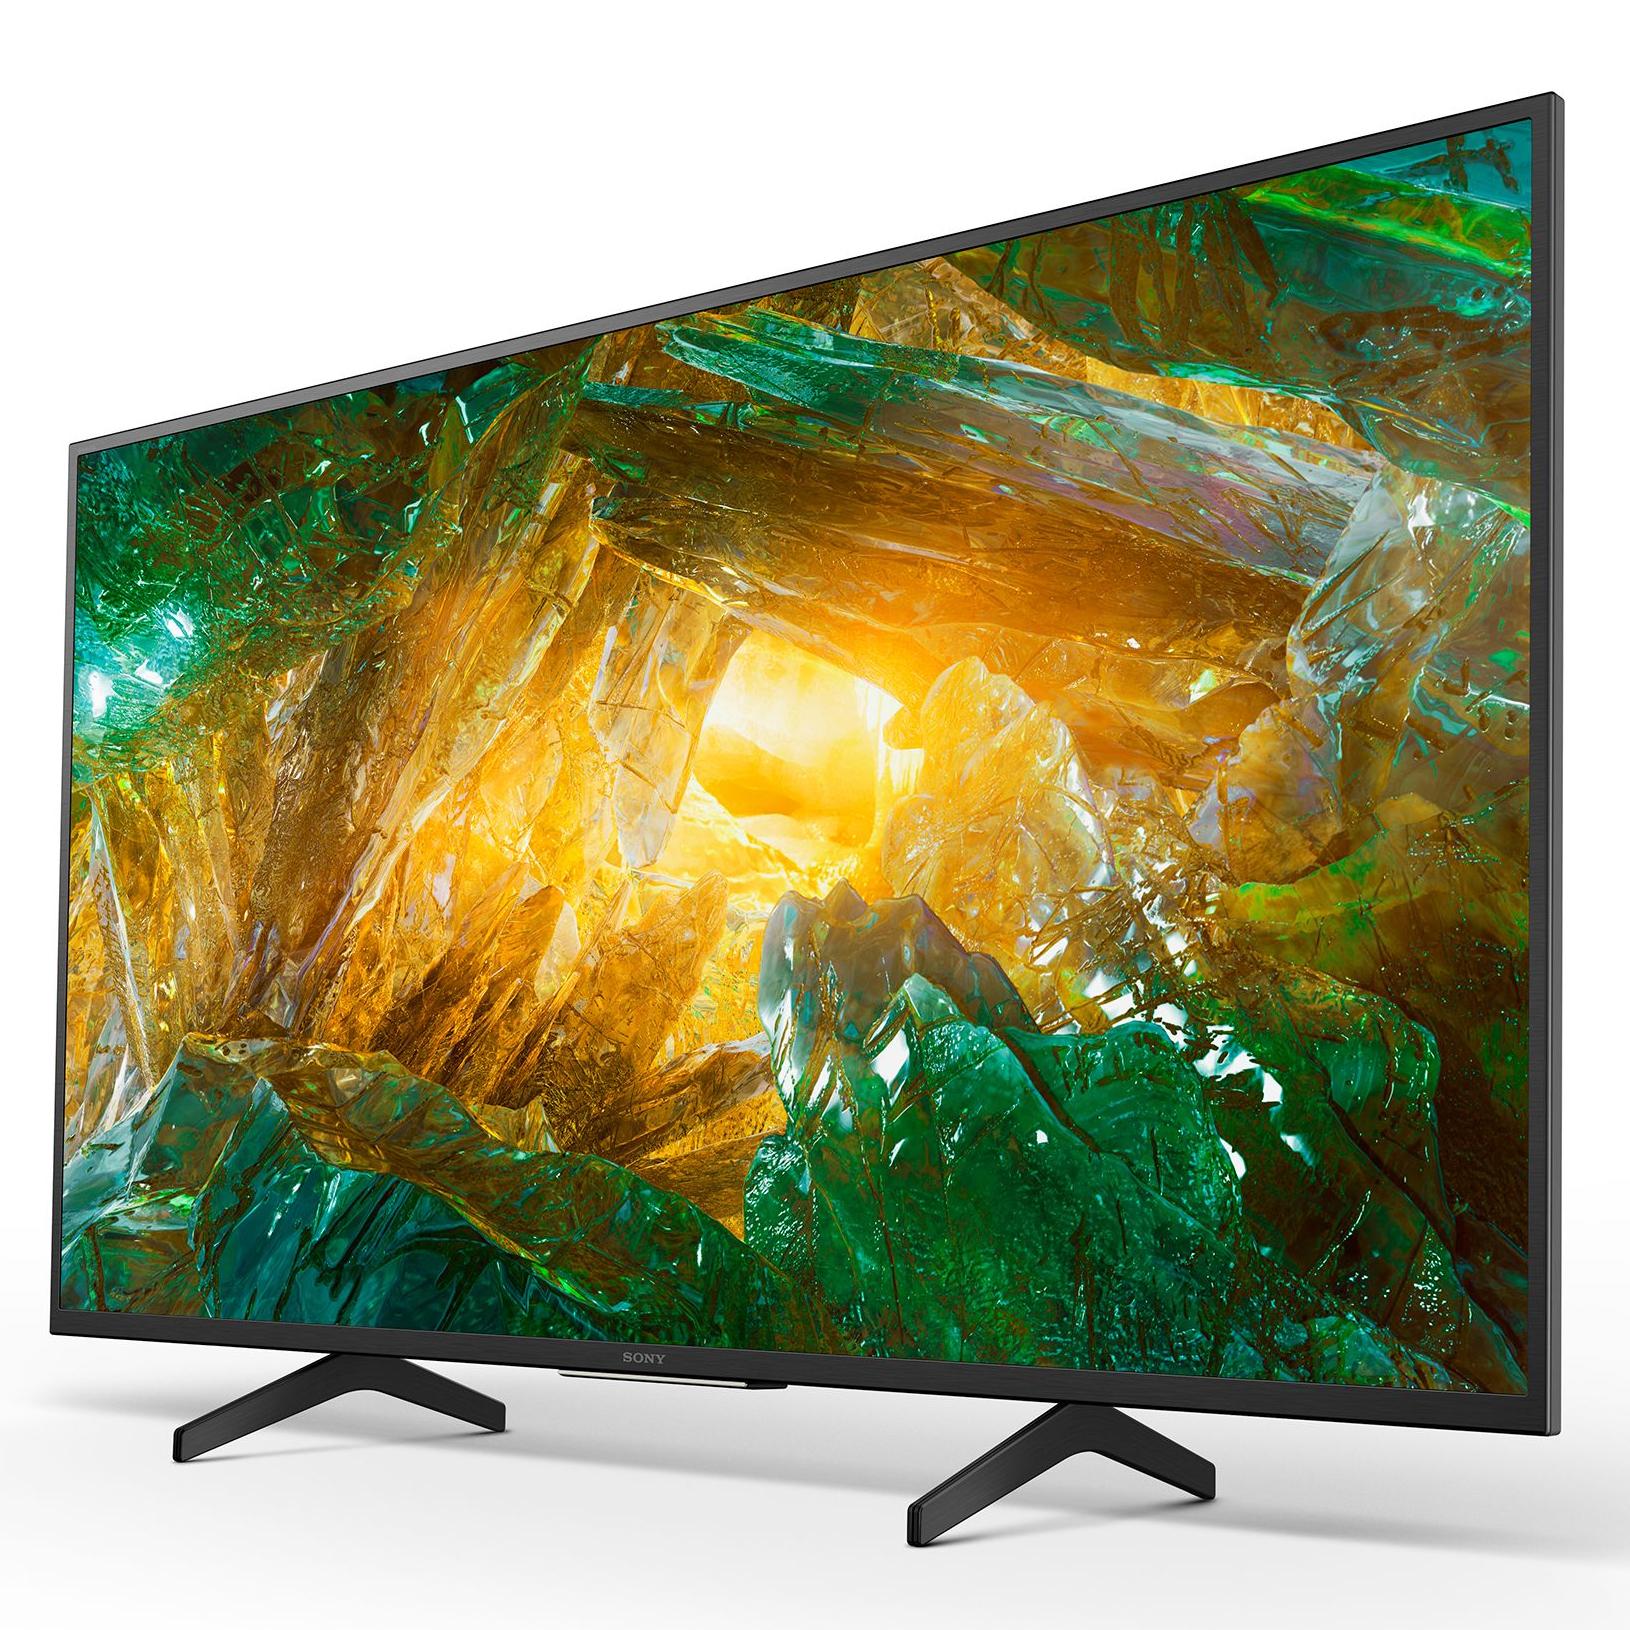 Tivi Sony android 4K 55 inch KD-55X8050H